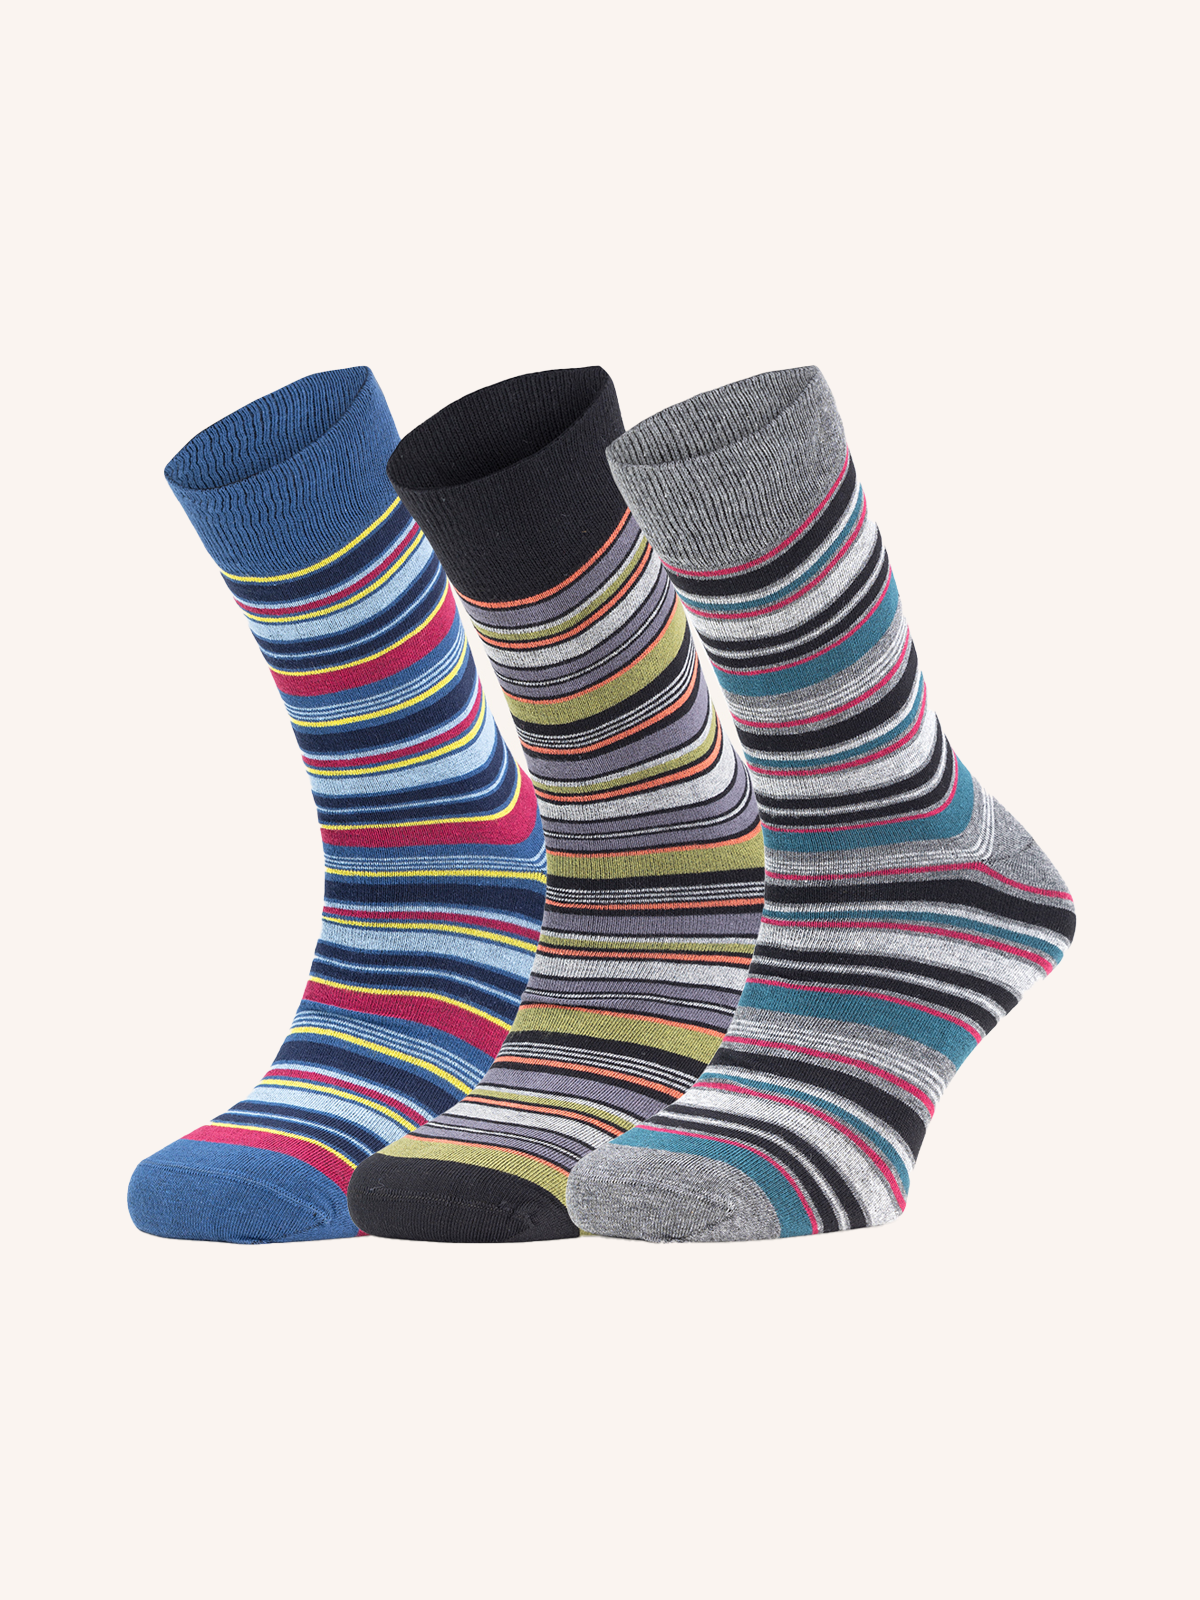 Short Combed Cotton Sock for Men | Fantasy | Pack of 3 pairs | Bruce C